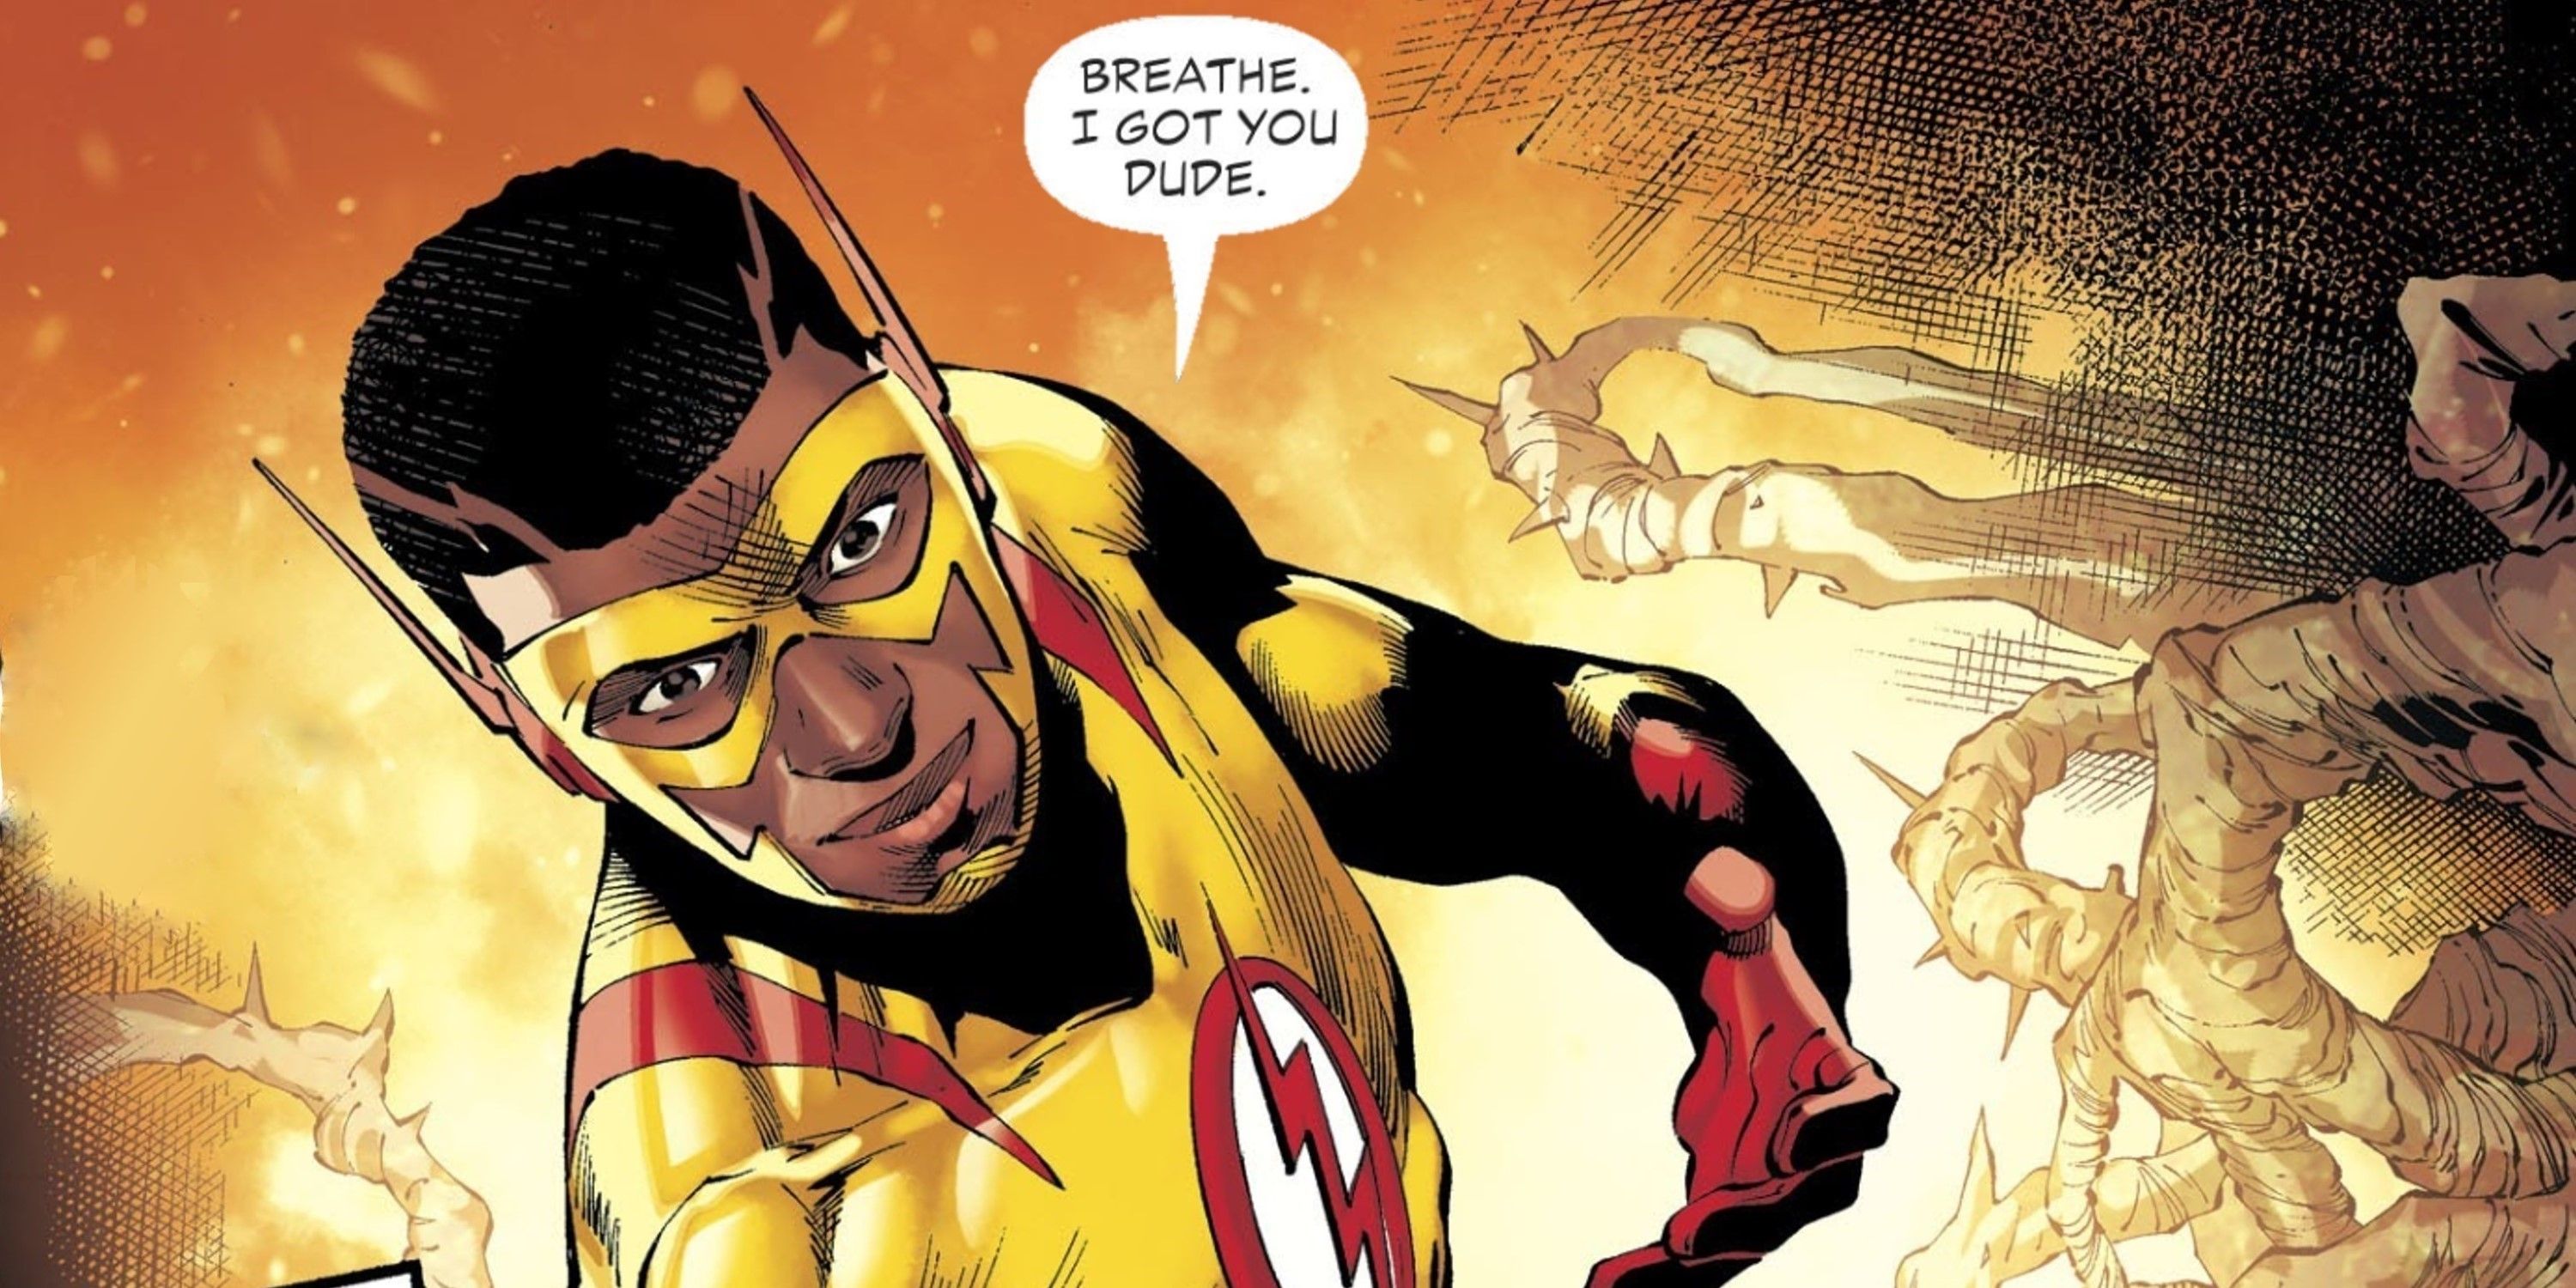 Wallace West as the new Kid Flash in DC Comics